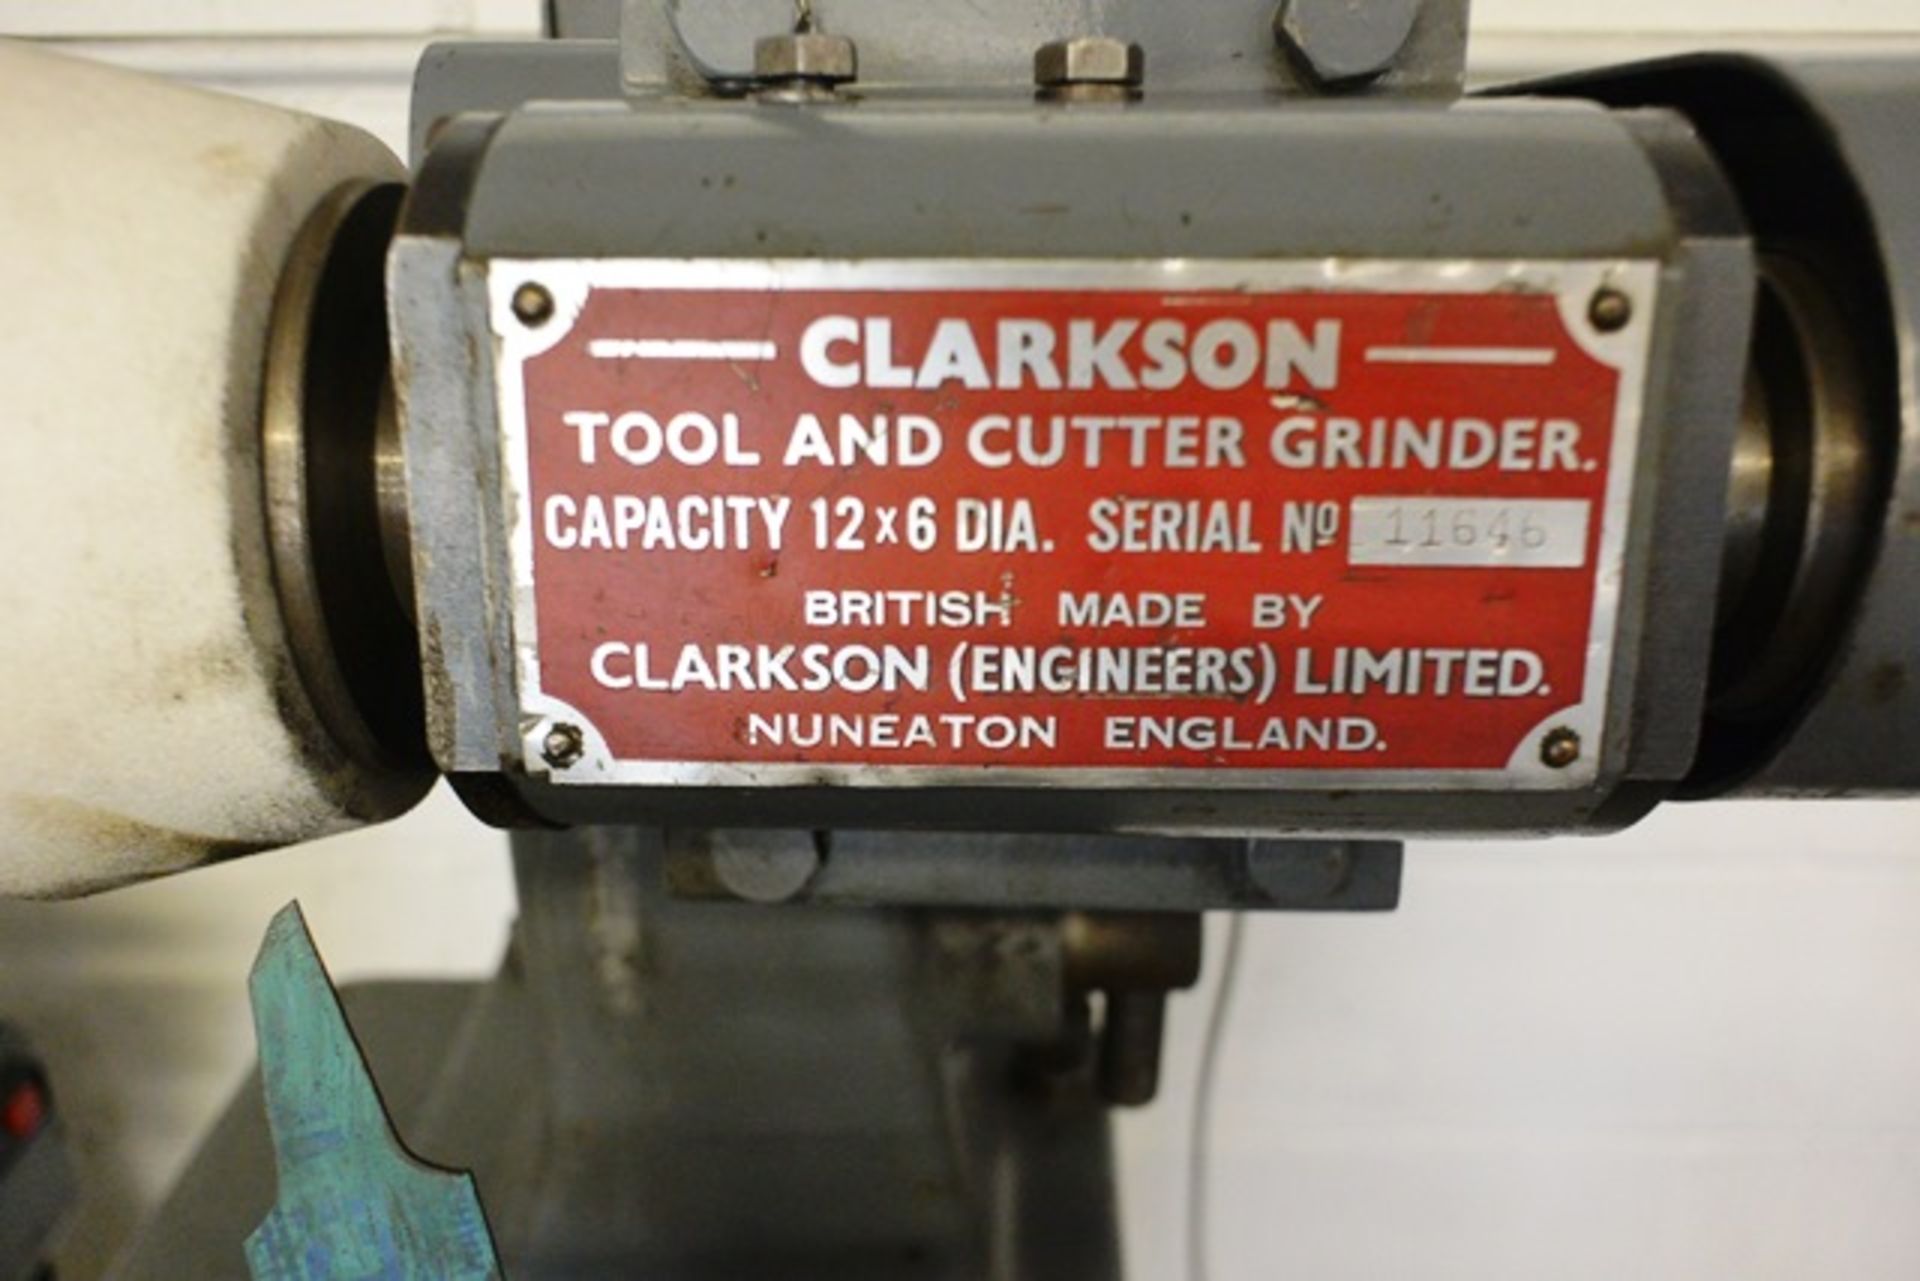 Clarkson Tool and Cutter Grinder, capacity 12 x 6" diameter serial no. 11646 (3 phase - plugged) ( - Bild 2 aus 3